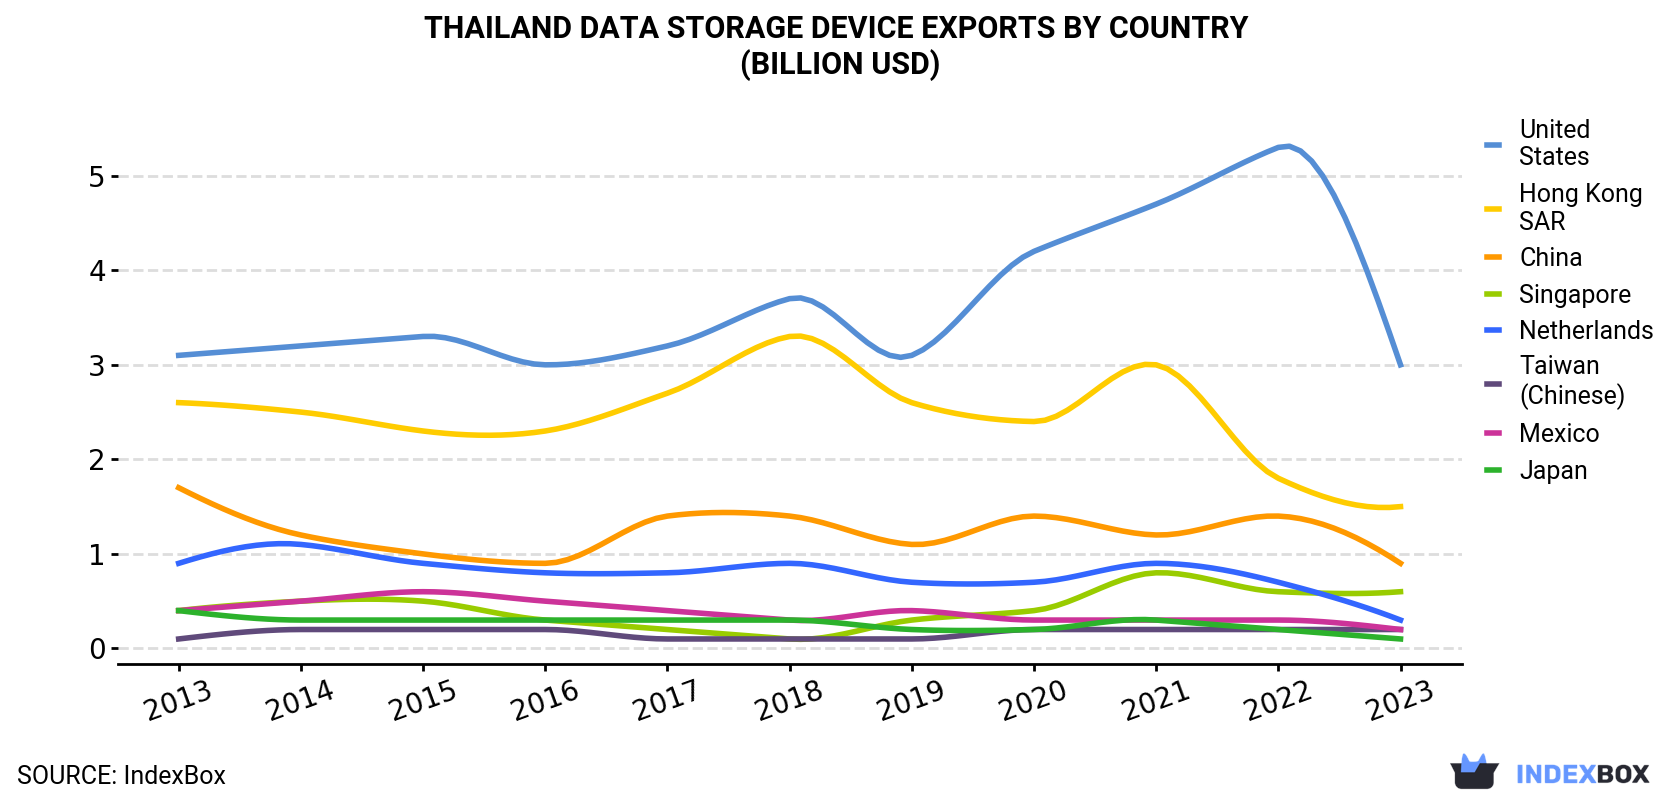 Thailand Data Storage Device Exports By Country (Billion USD)